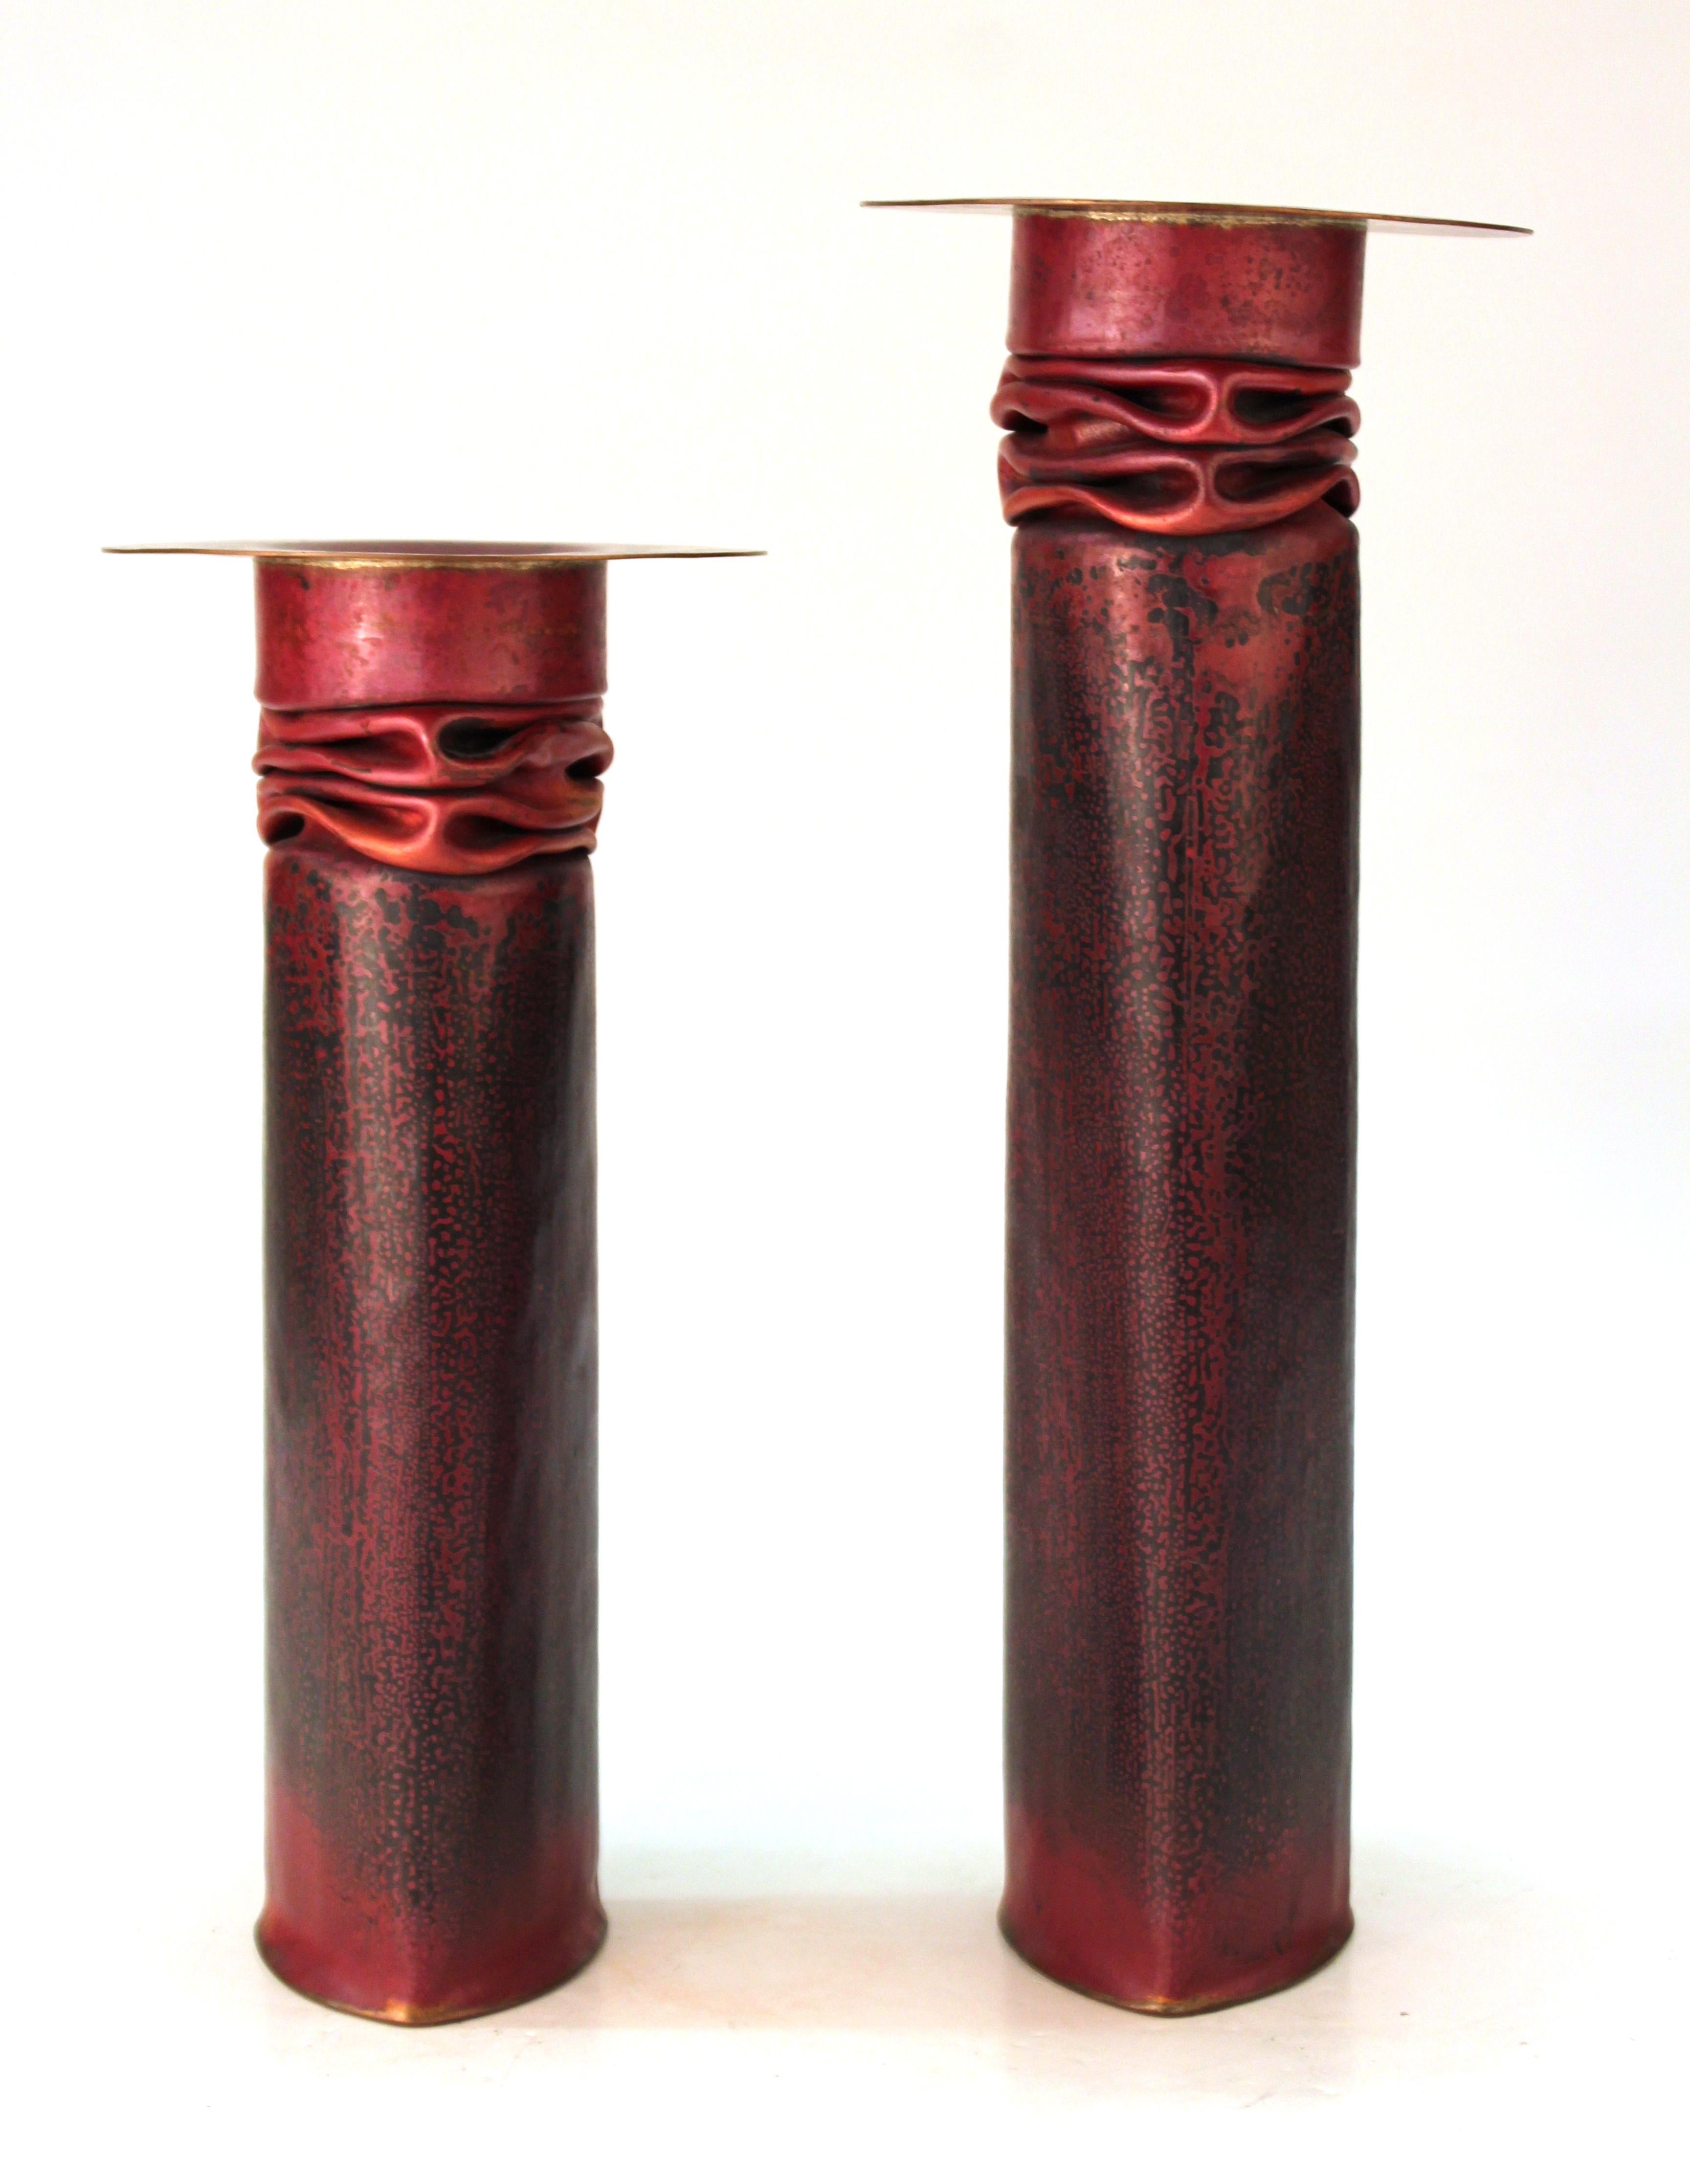 American modernist pair of candle-holders by famed metal-smith Thomas Roy Markusen, made in copper with a rare red acid patina. The pair was made during the late 1970s to early 1980s in the United States and has makers marks on the bottom.
Markusen